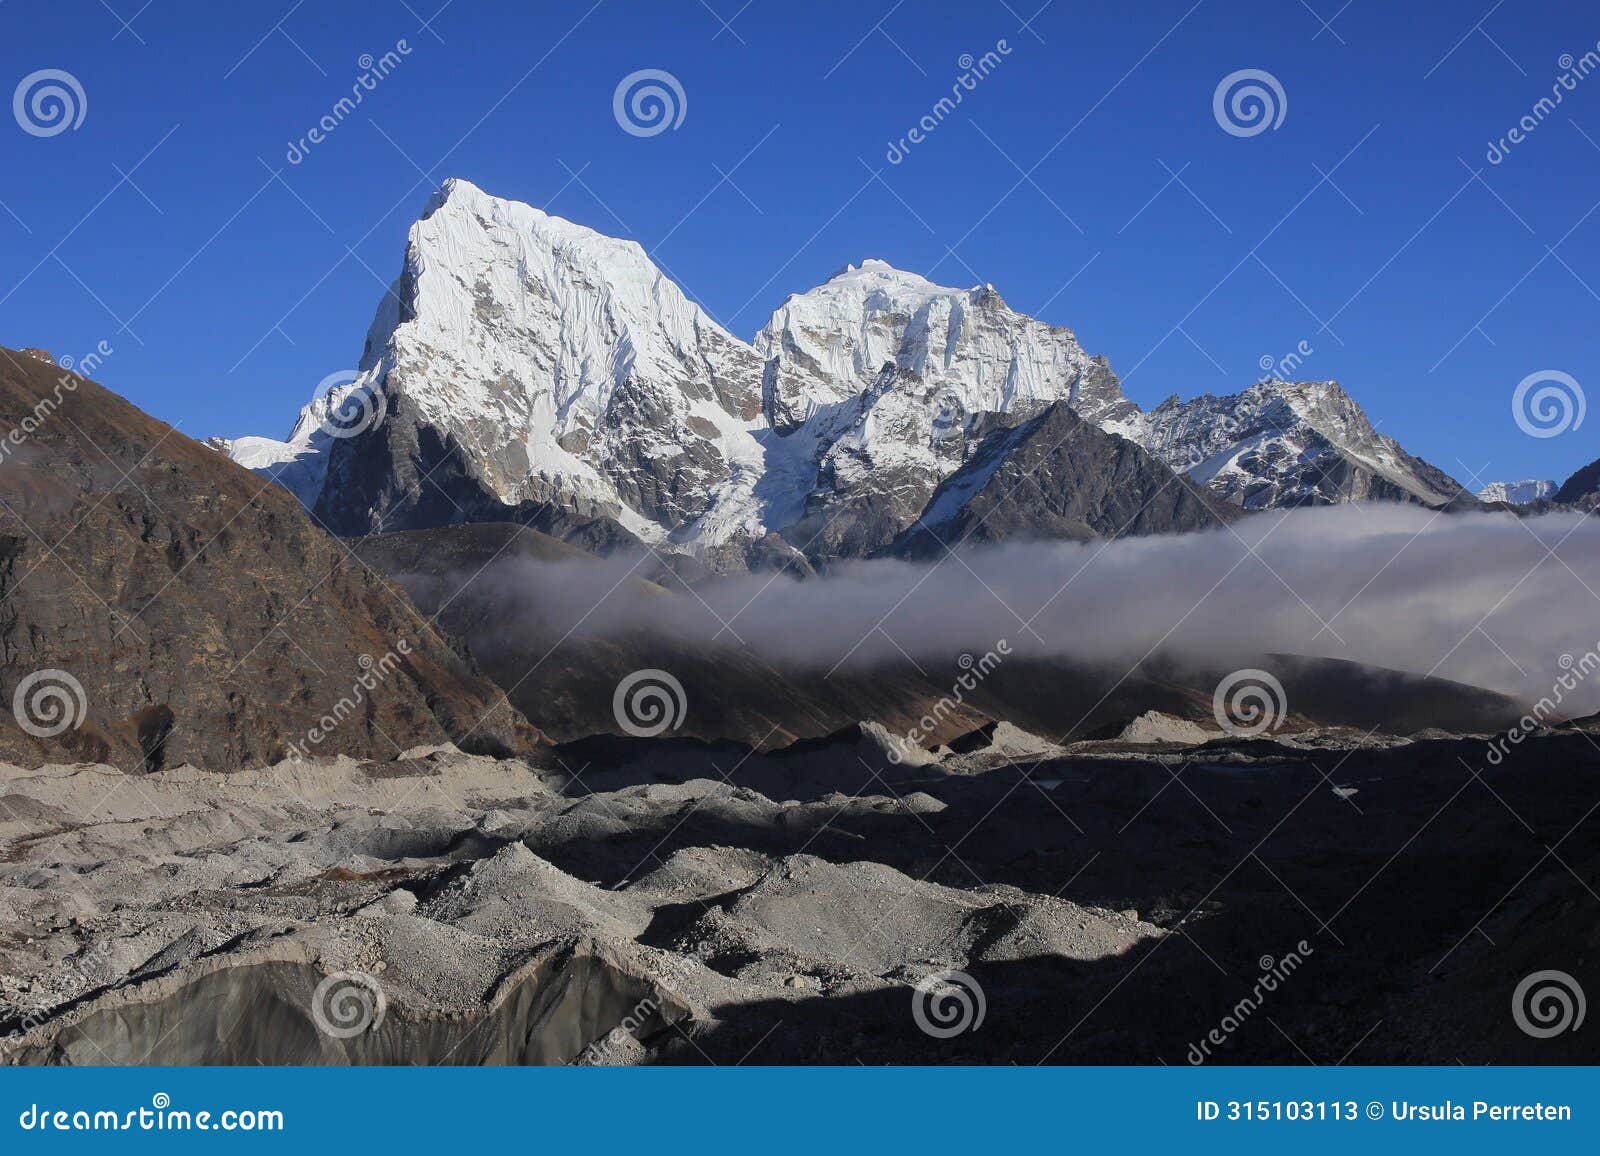 lower part of the ngozumba glacier and snow covered mountains cholatse and tobuche, nepal